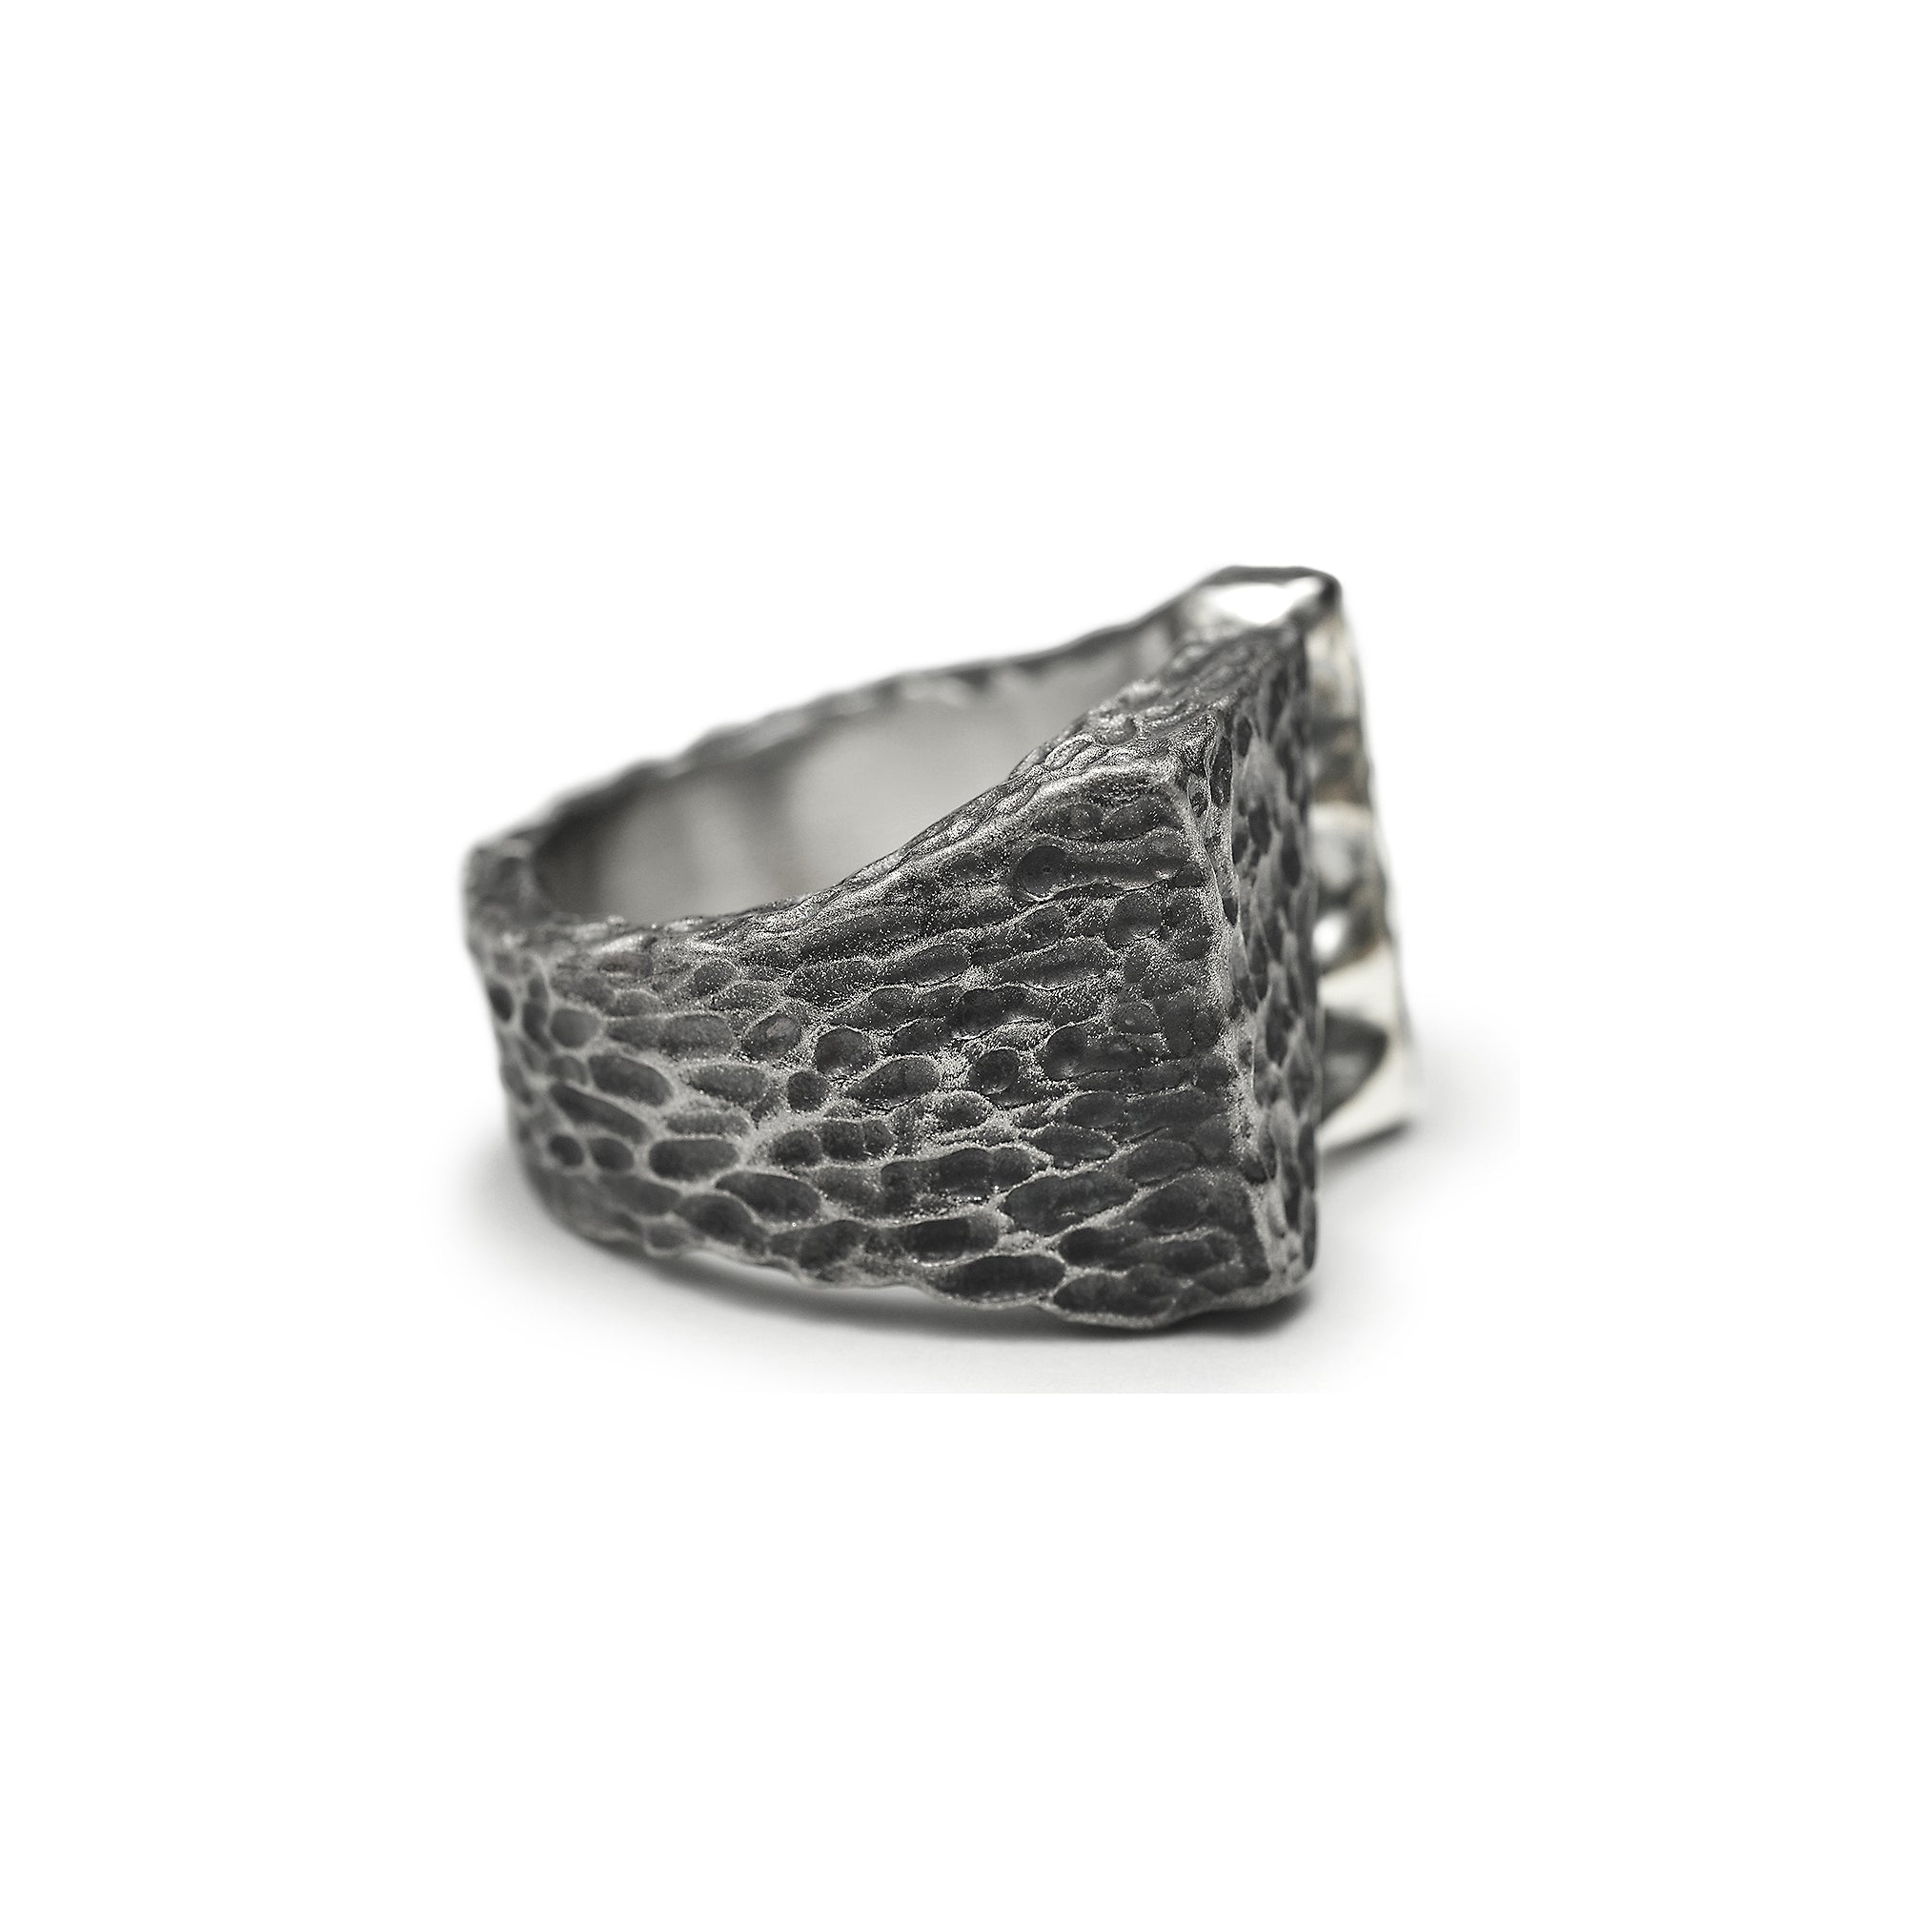 Eternal - Square sterling silver signet ring